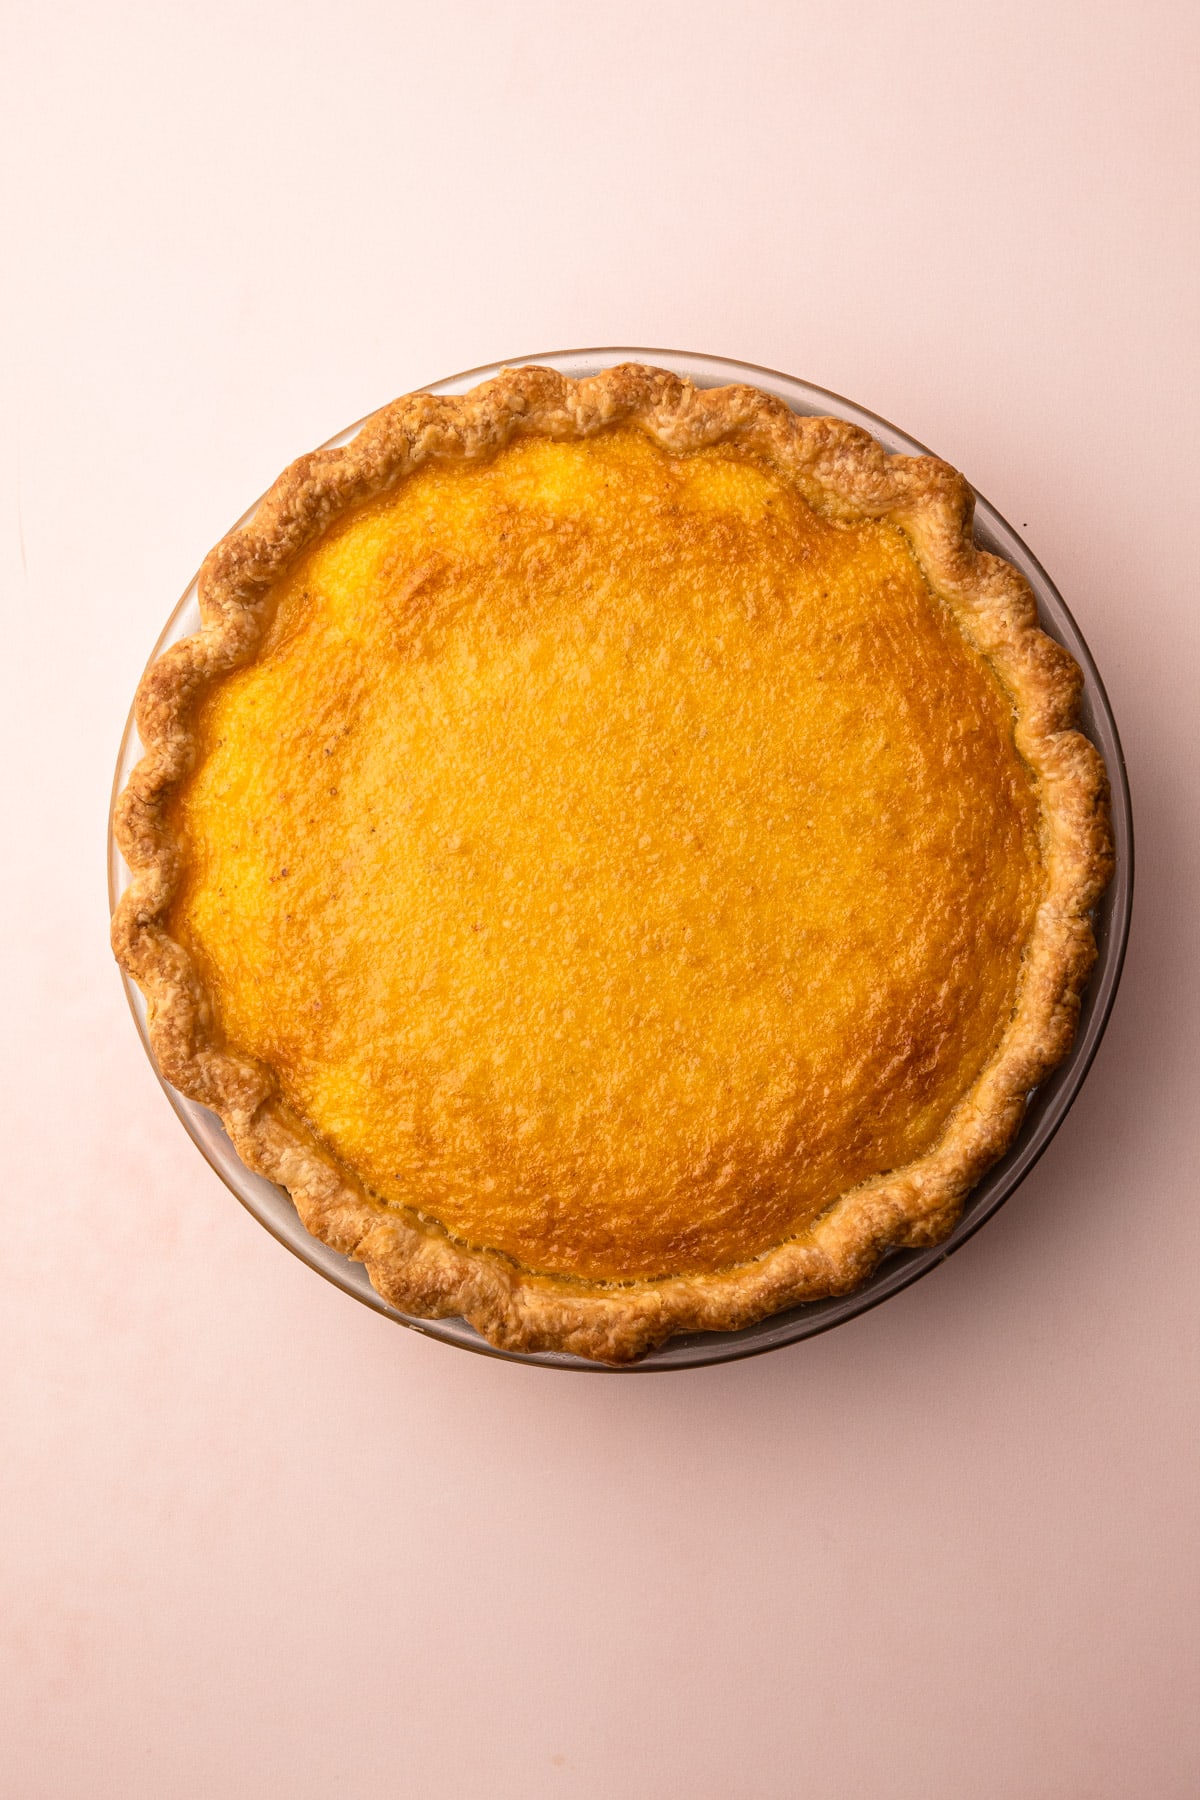 A fully baked chess pie in a pate sucree crust.